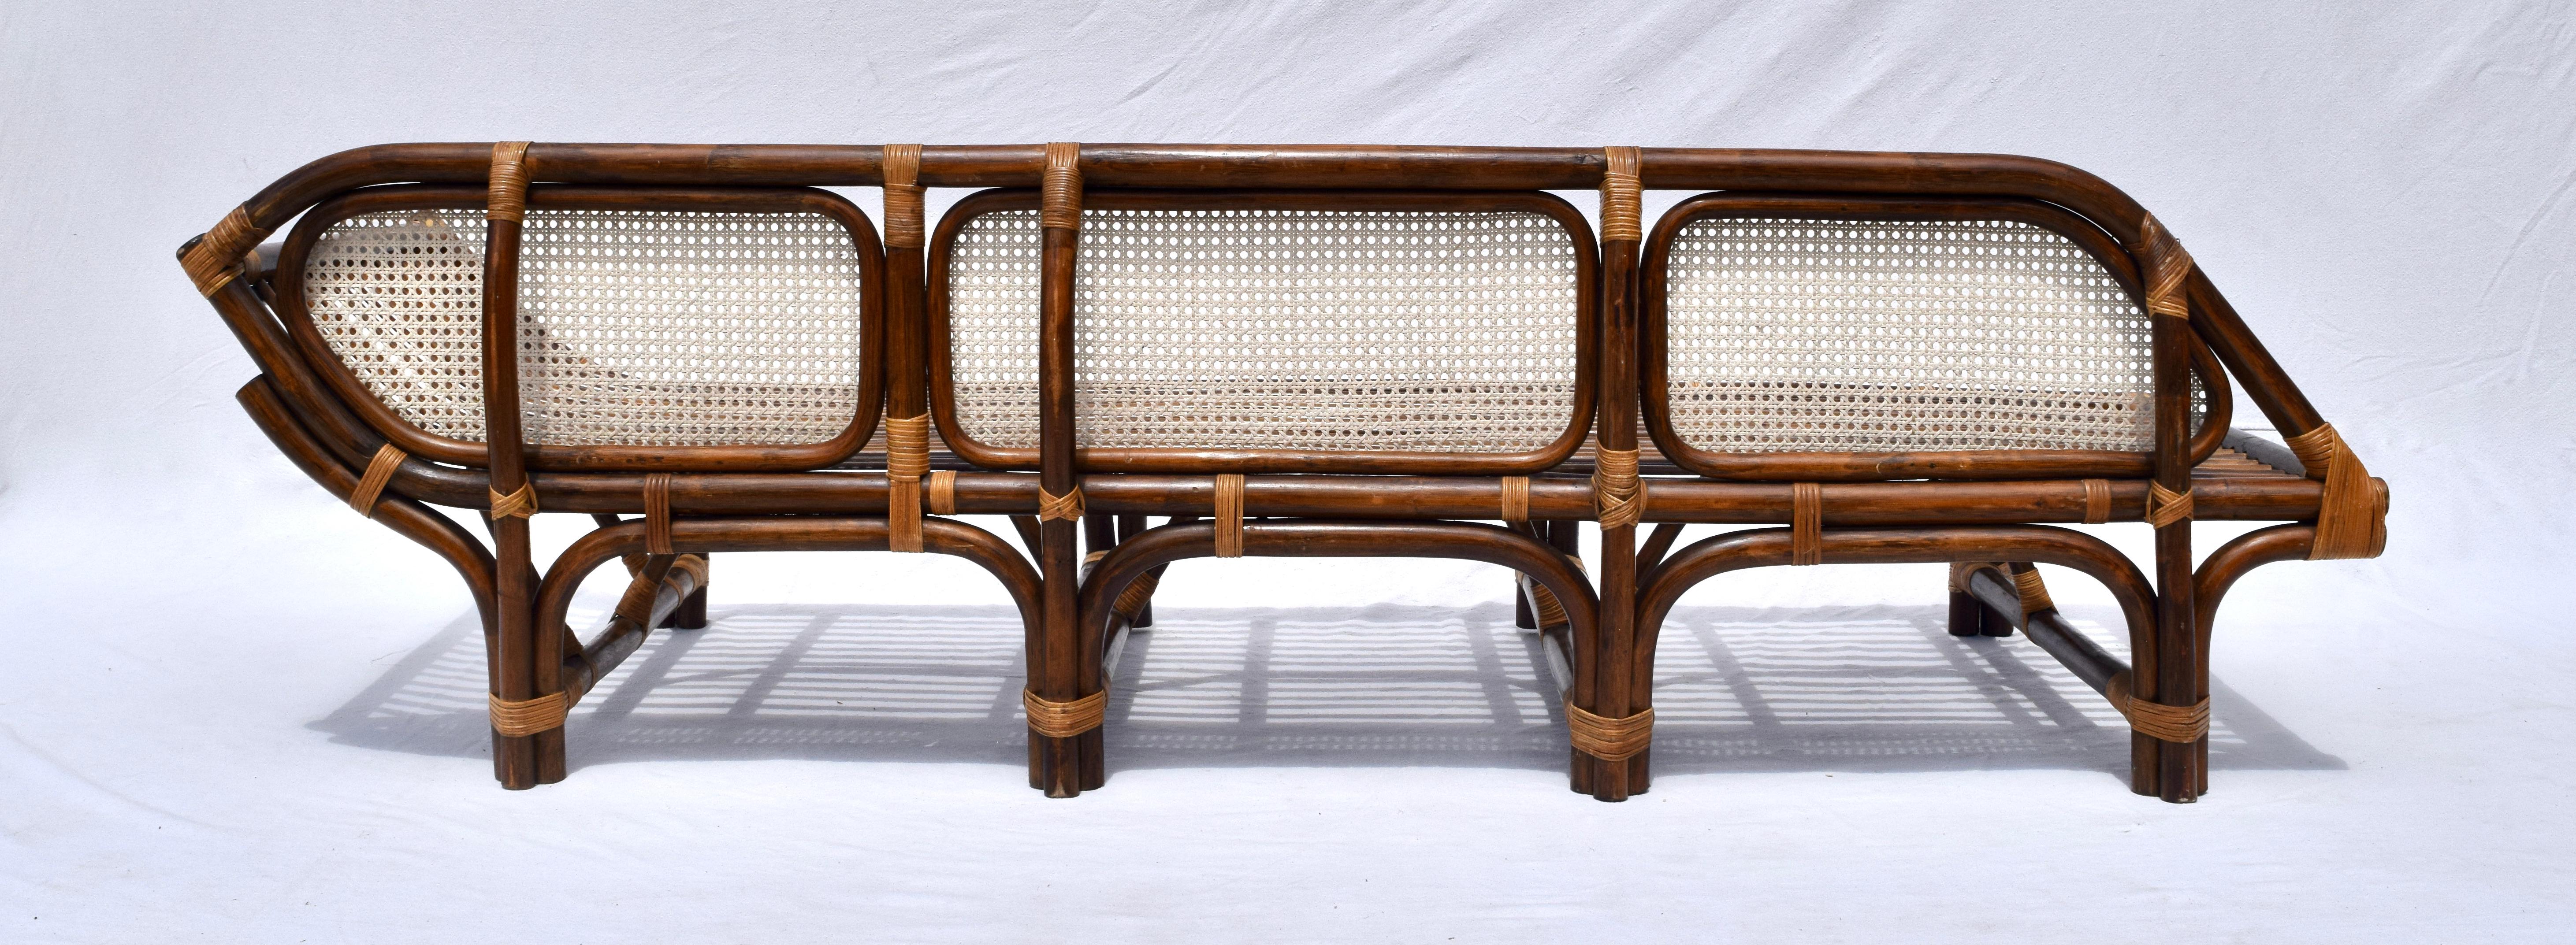 1980's, Bamboo Rattan Caned Daybed Chaise Lounge 3